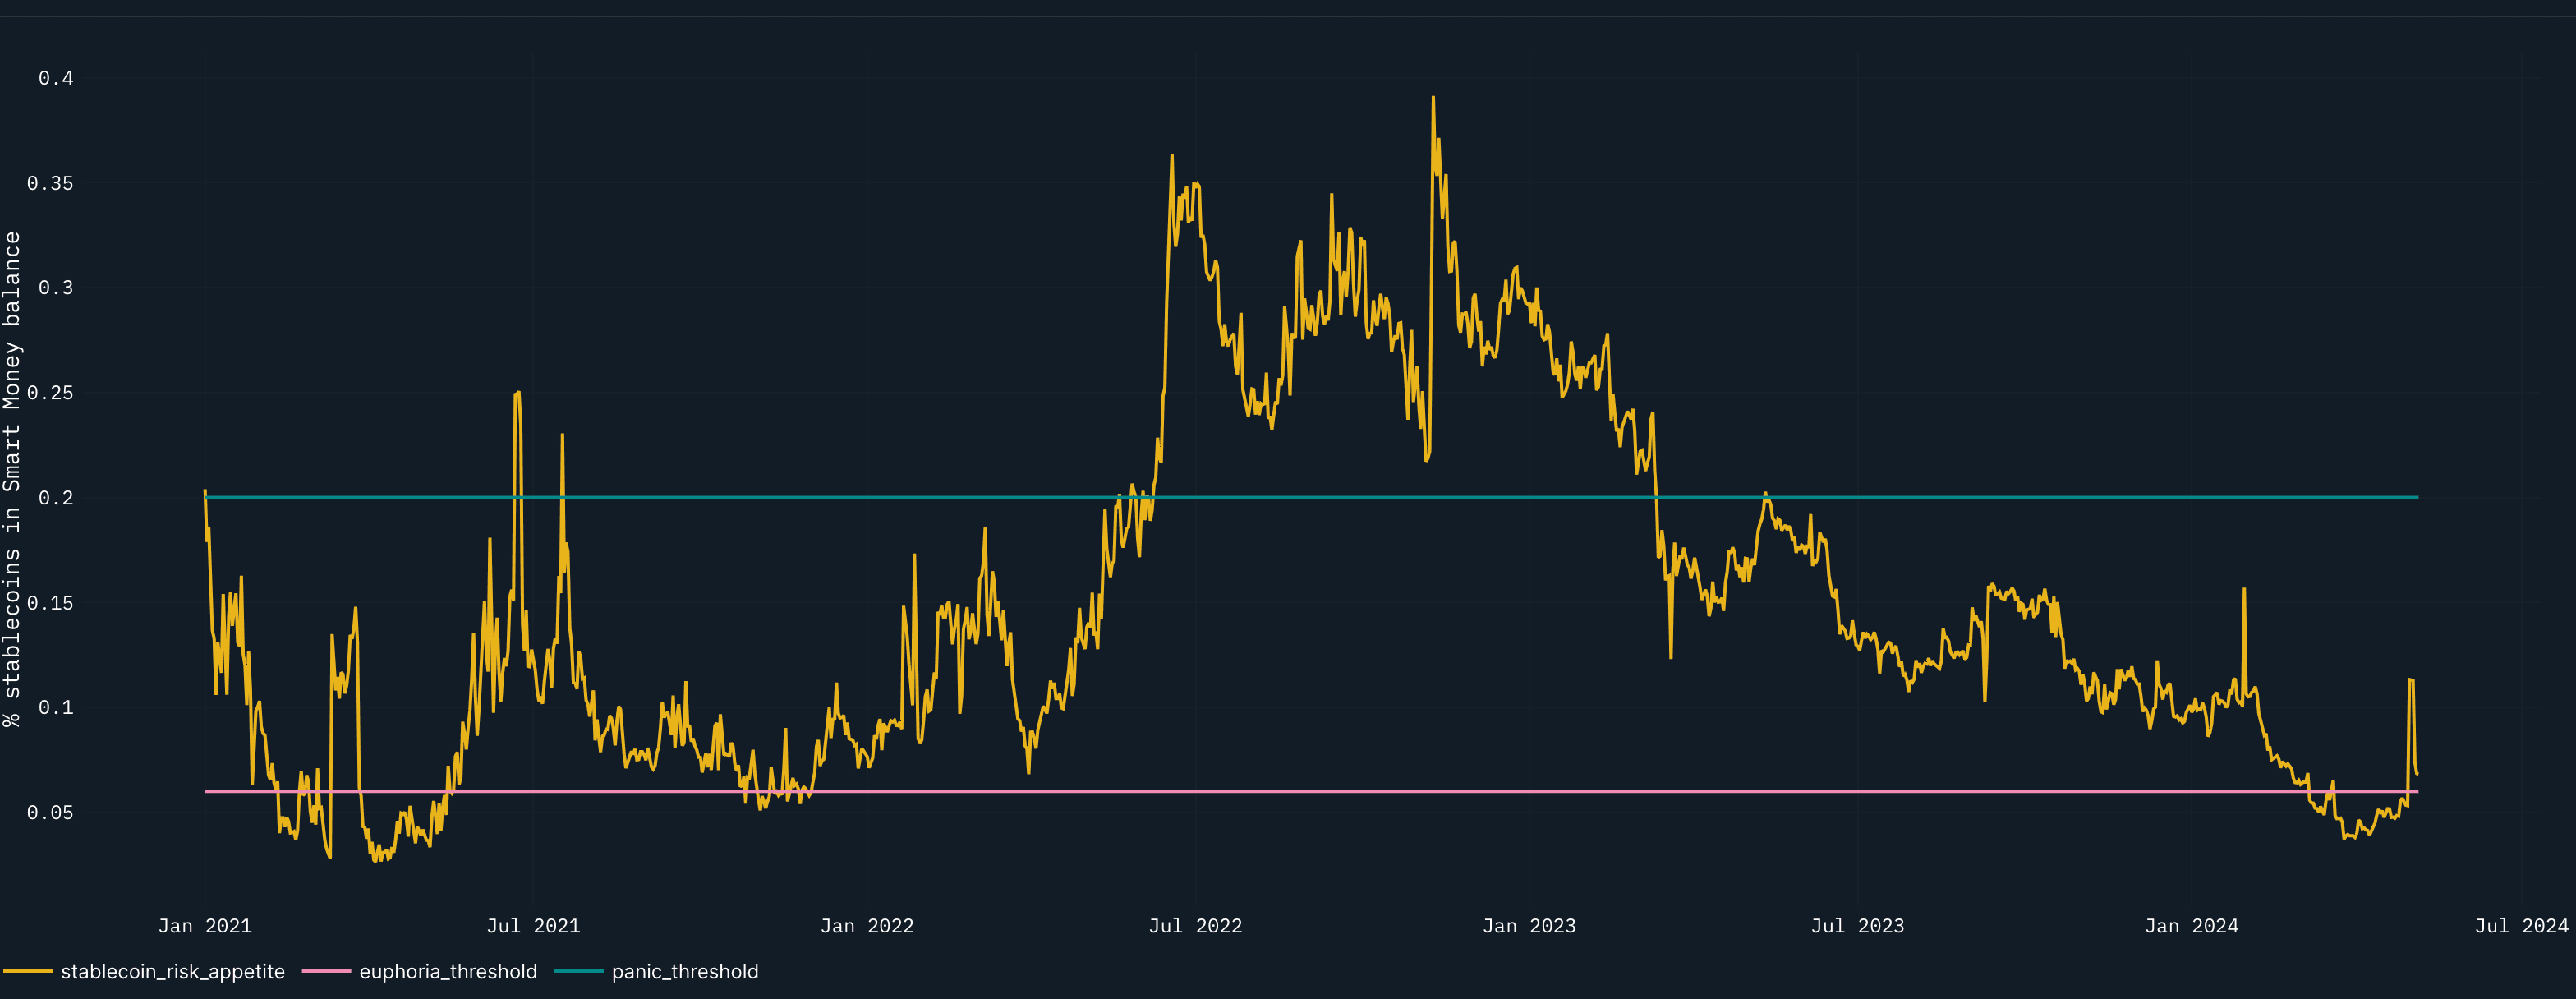 SM Stablecoin turned risk-off on April 30